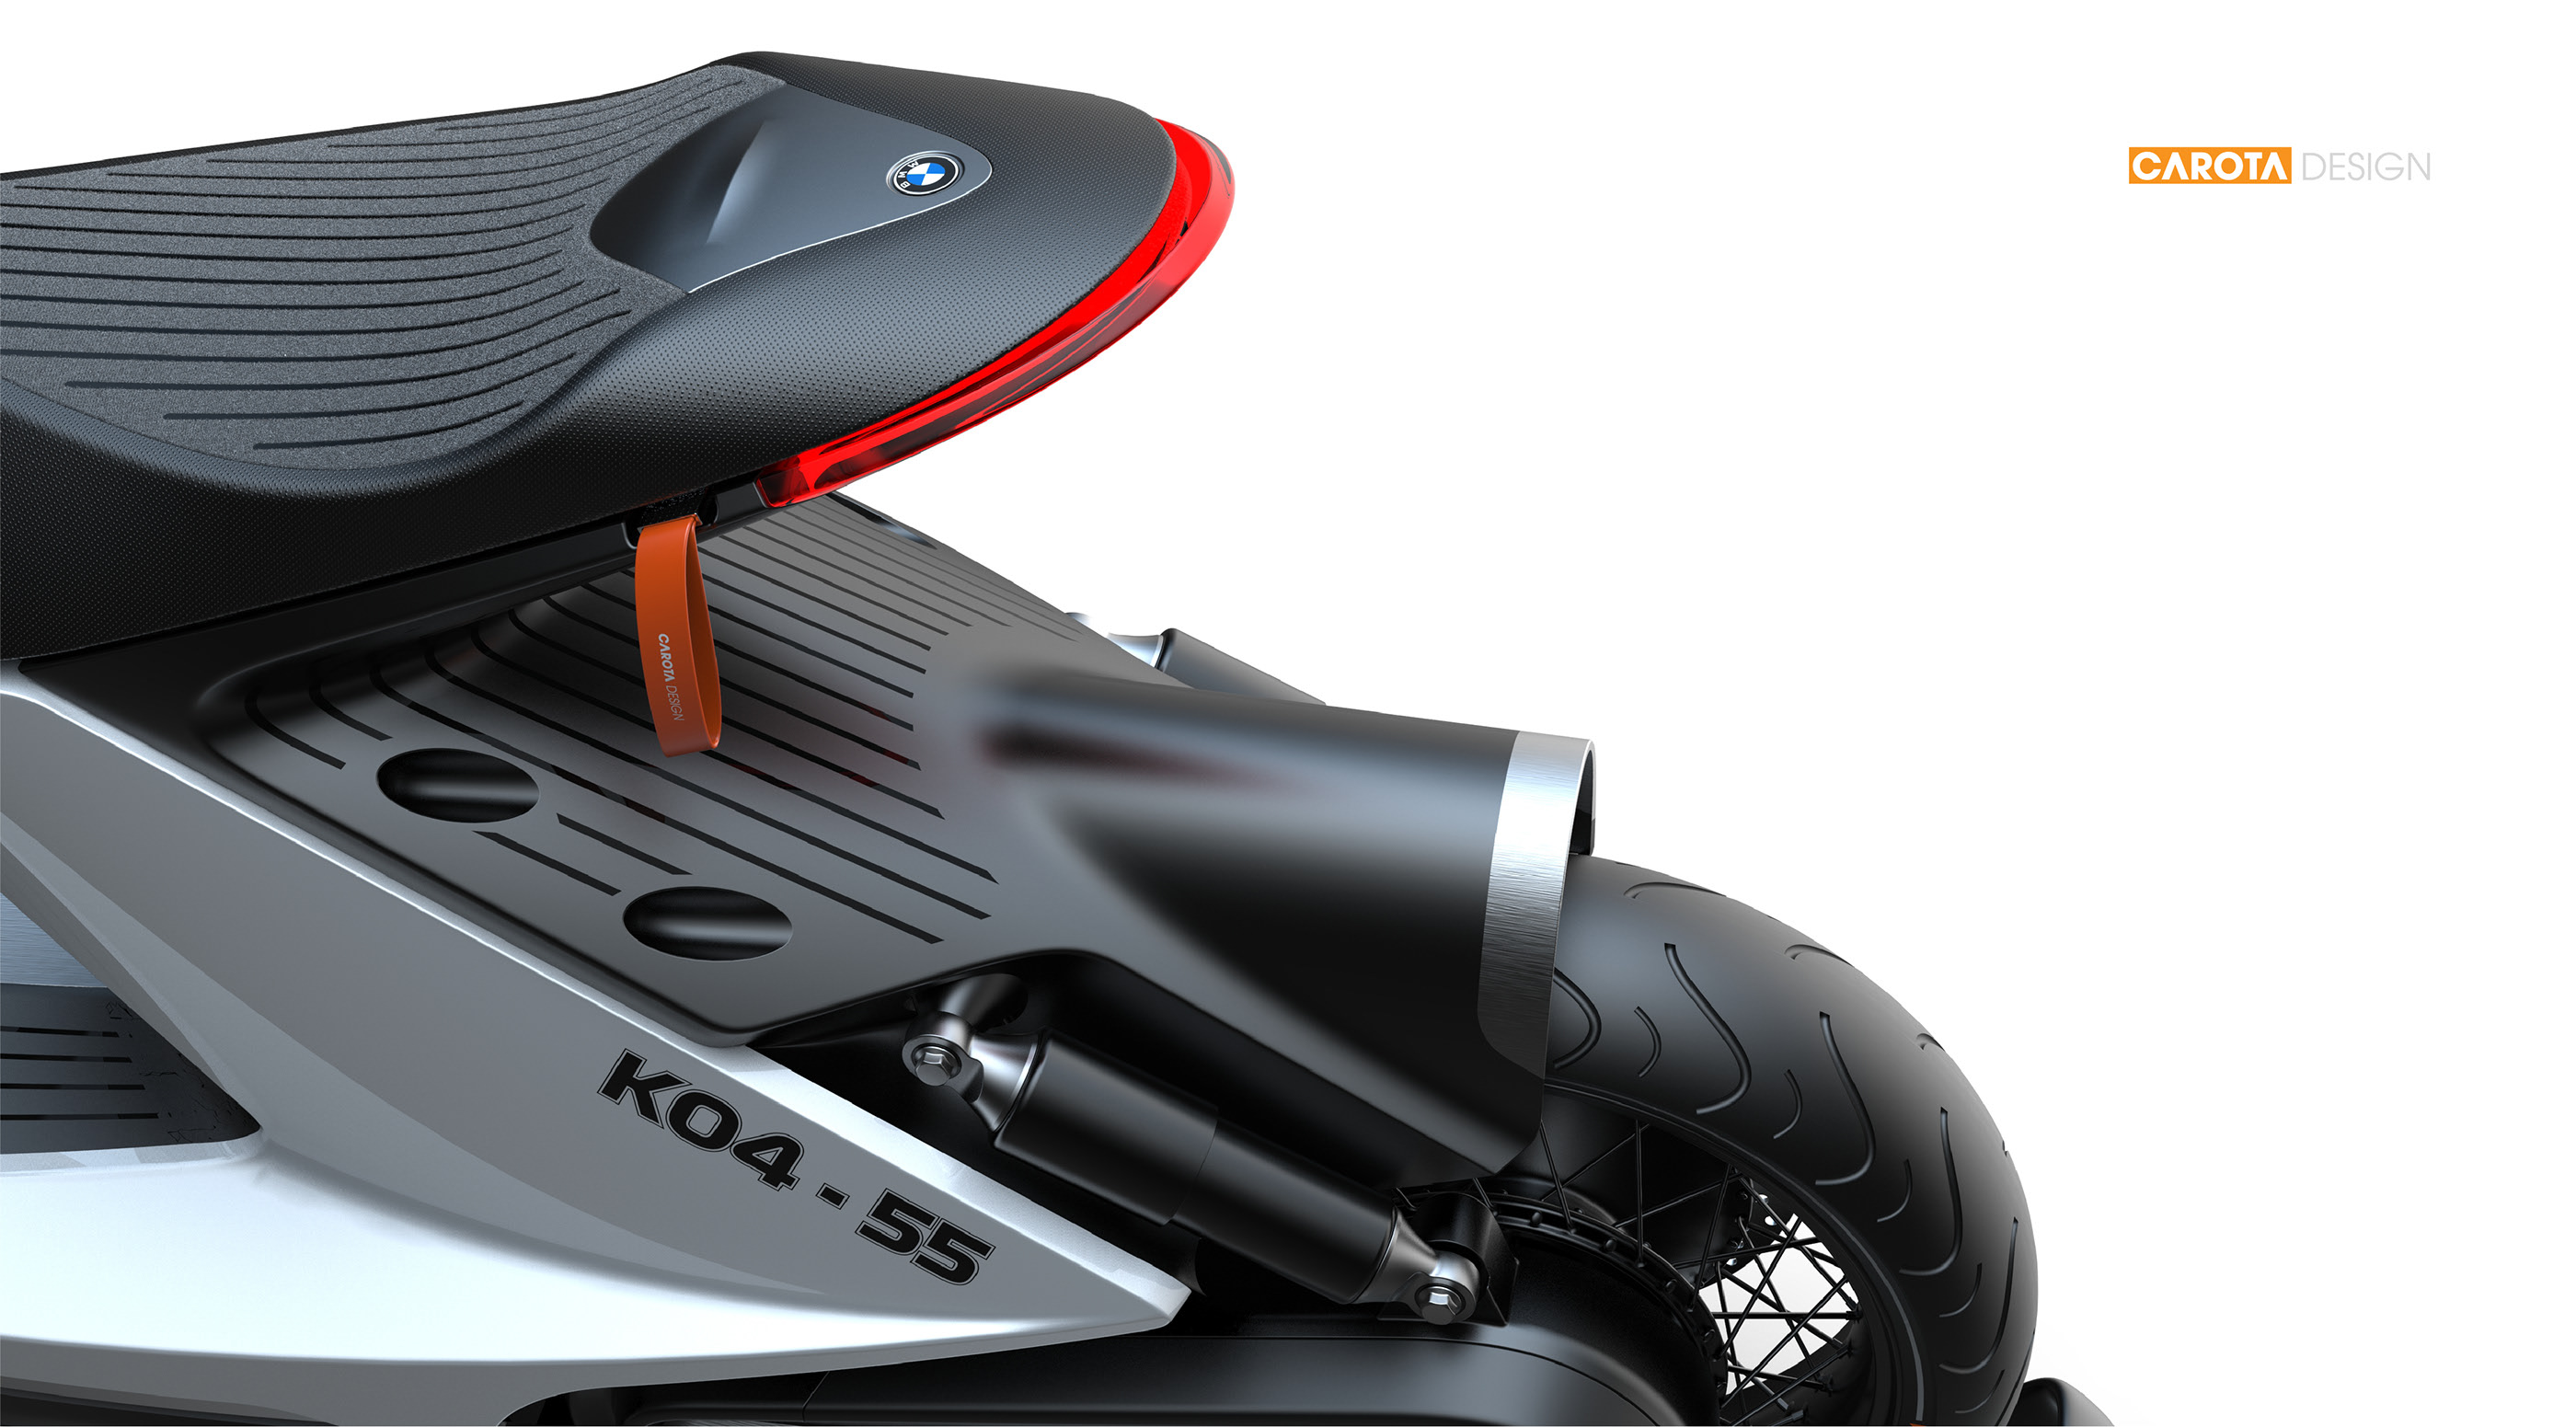 This BMW Z-Shaped Motorrad E-Scooter Concept Brings Clean Energy Rides to this Century